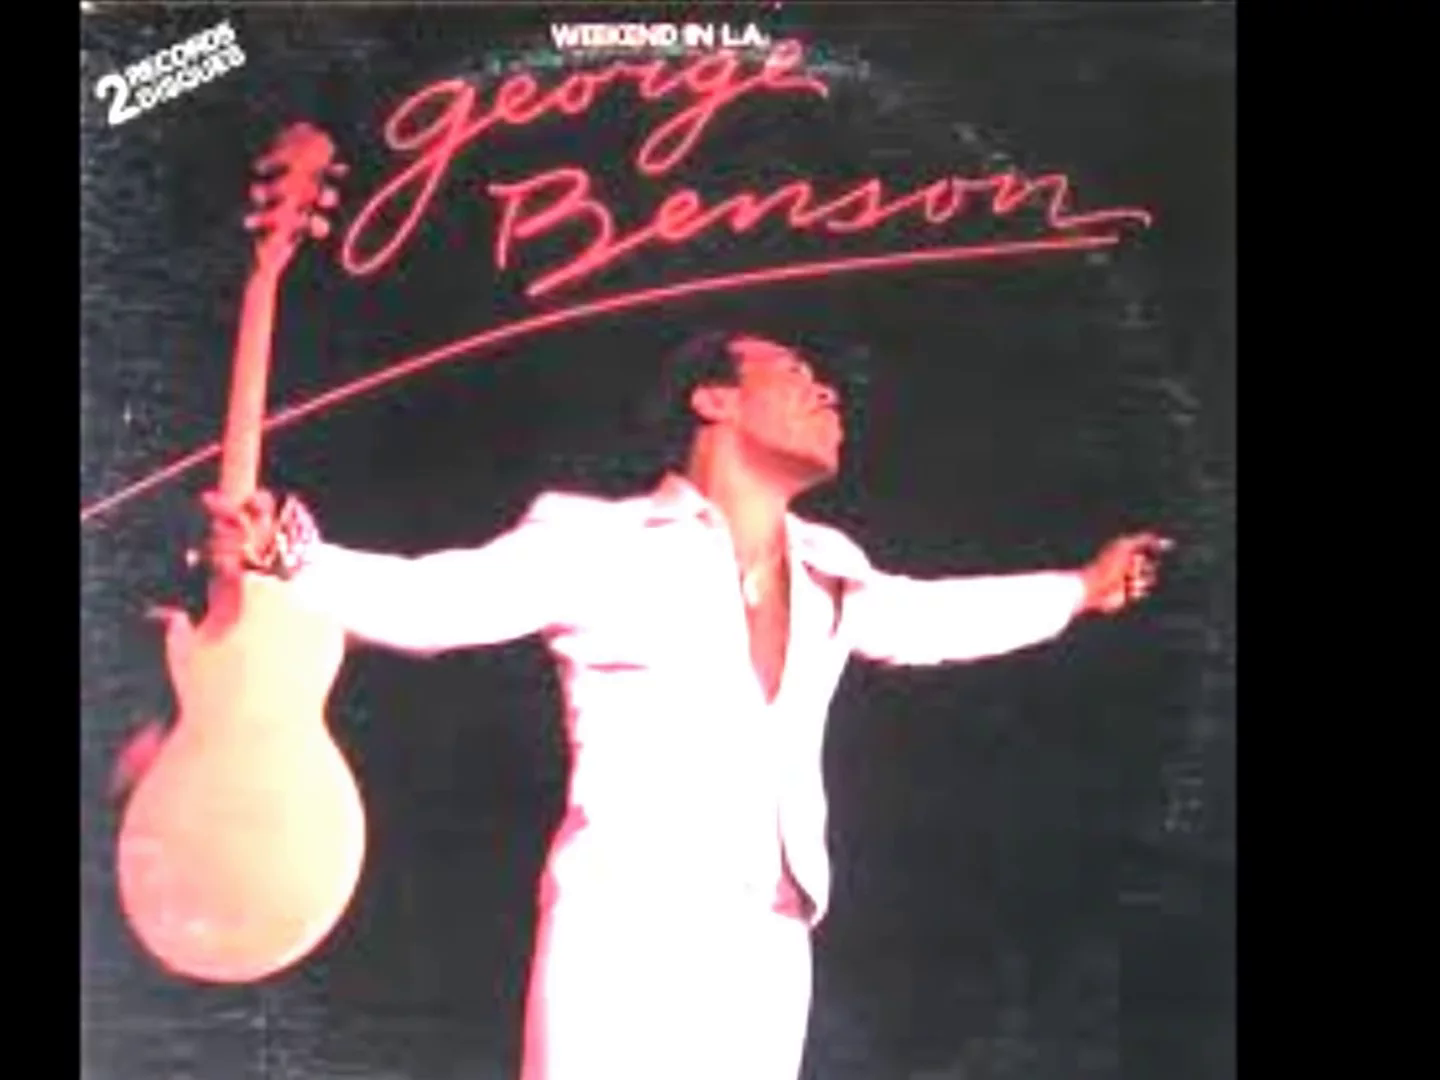 Art for On Broadway by George Benson